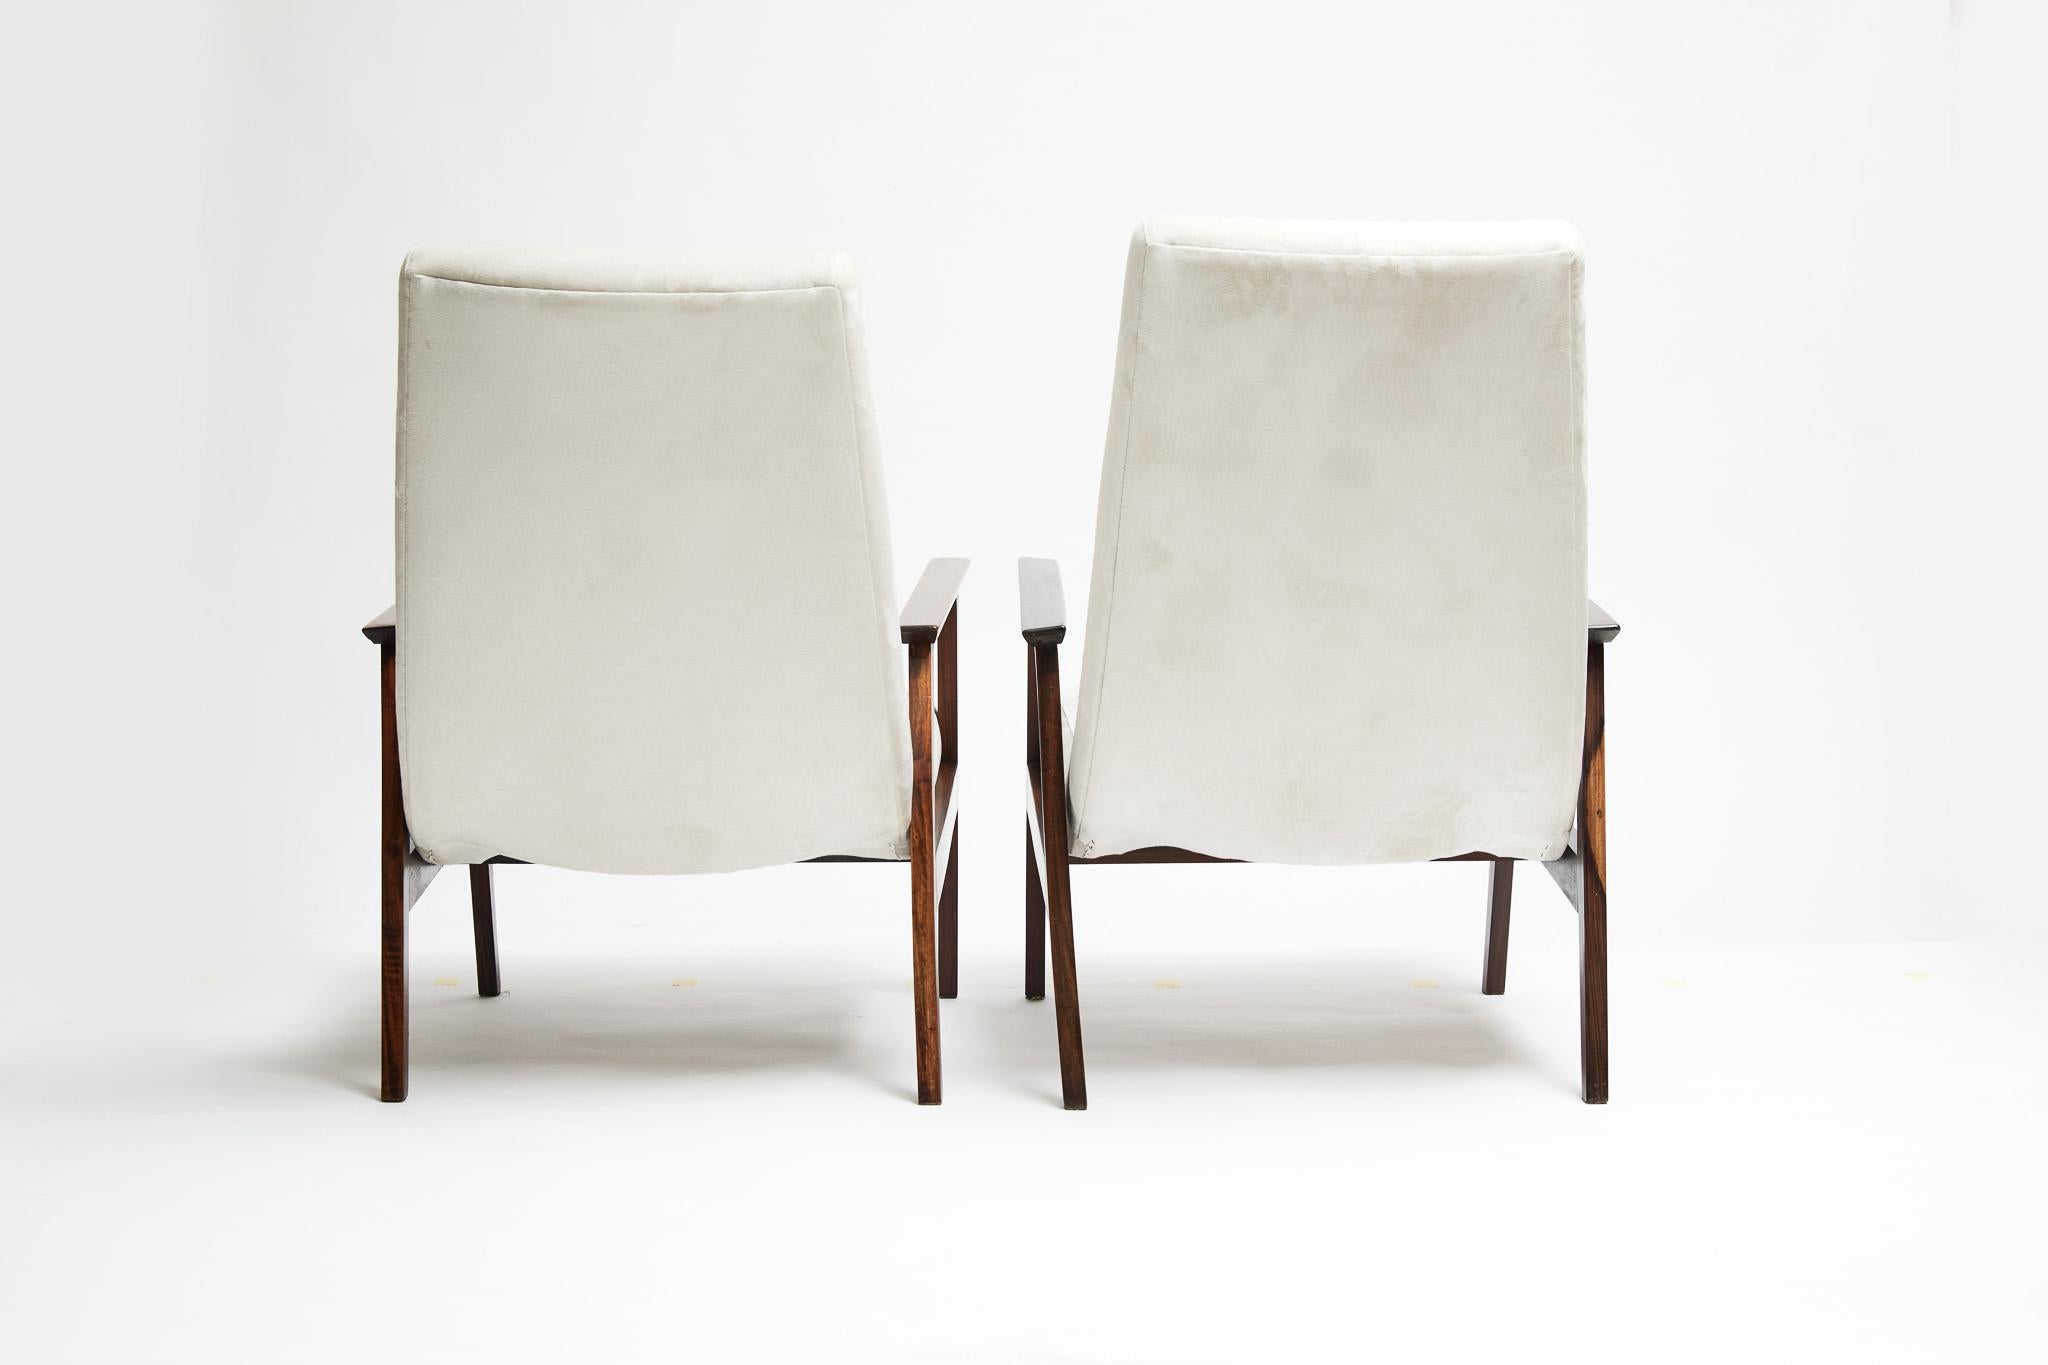 Woodwork Mid-Century Modern Armchairs in Hardwood & White Suede by Gelli, ci 1960, Brazil For Sale